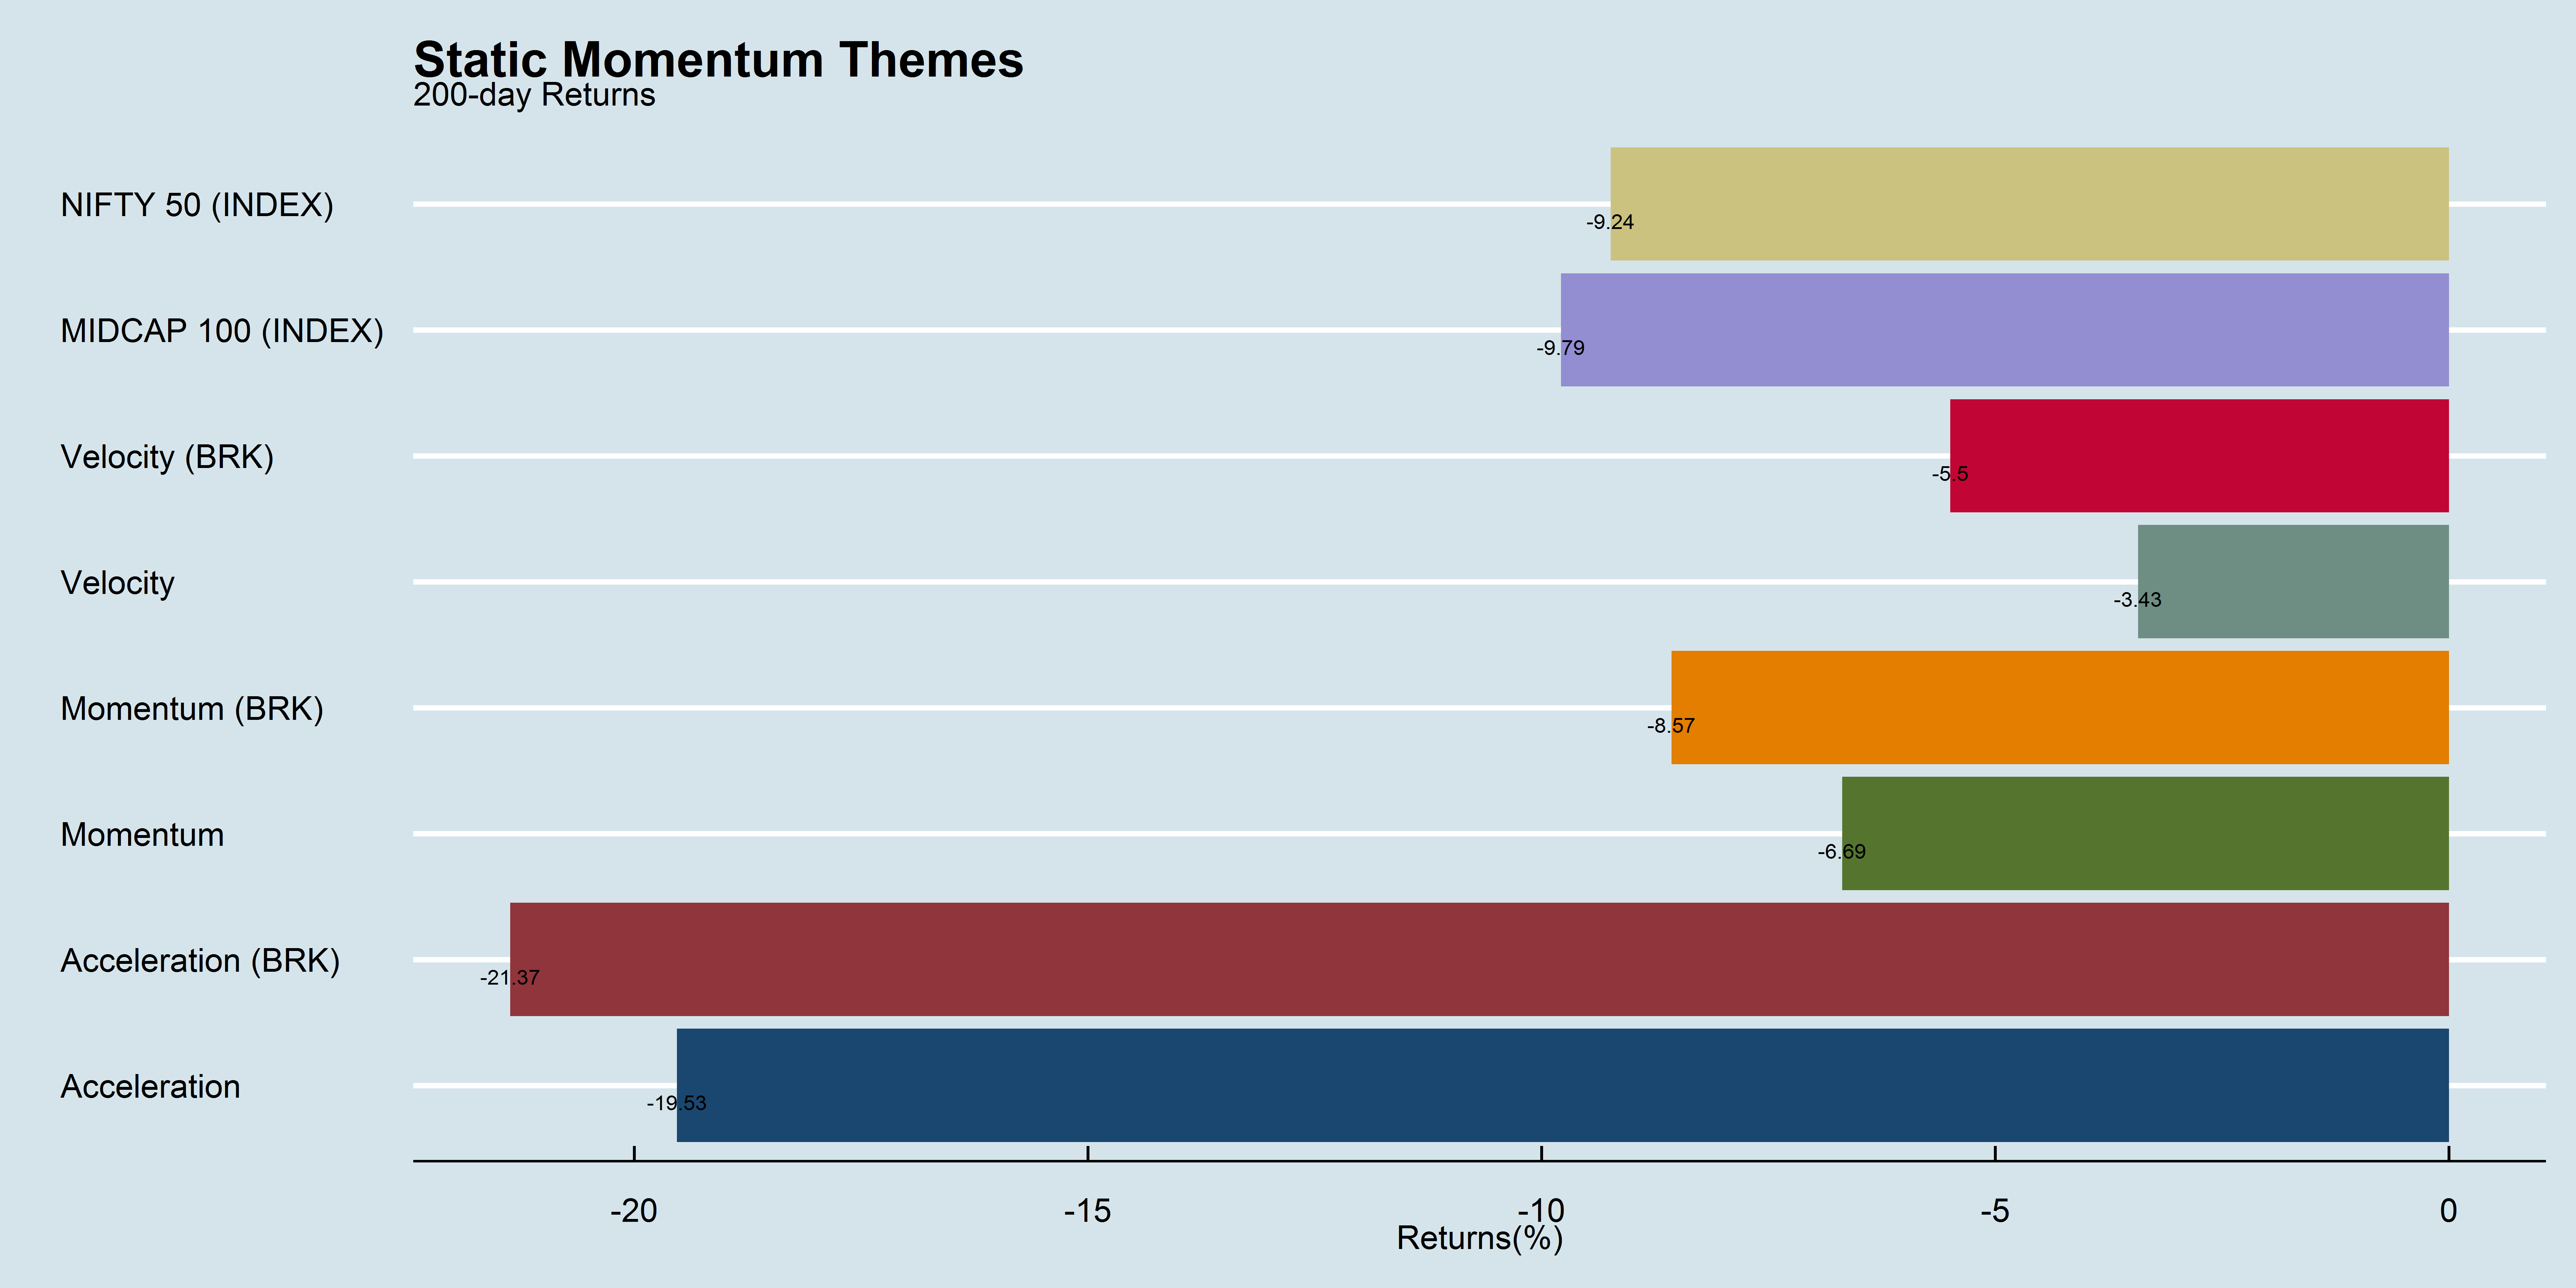 Static Momentum Themes 200-day performance